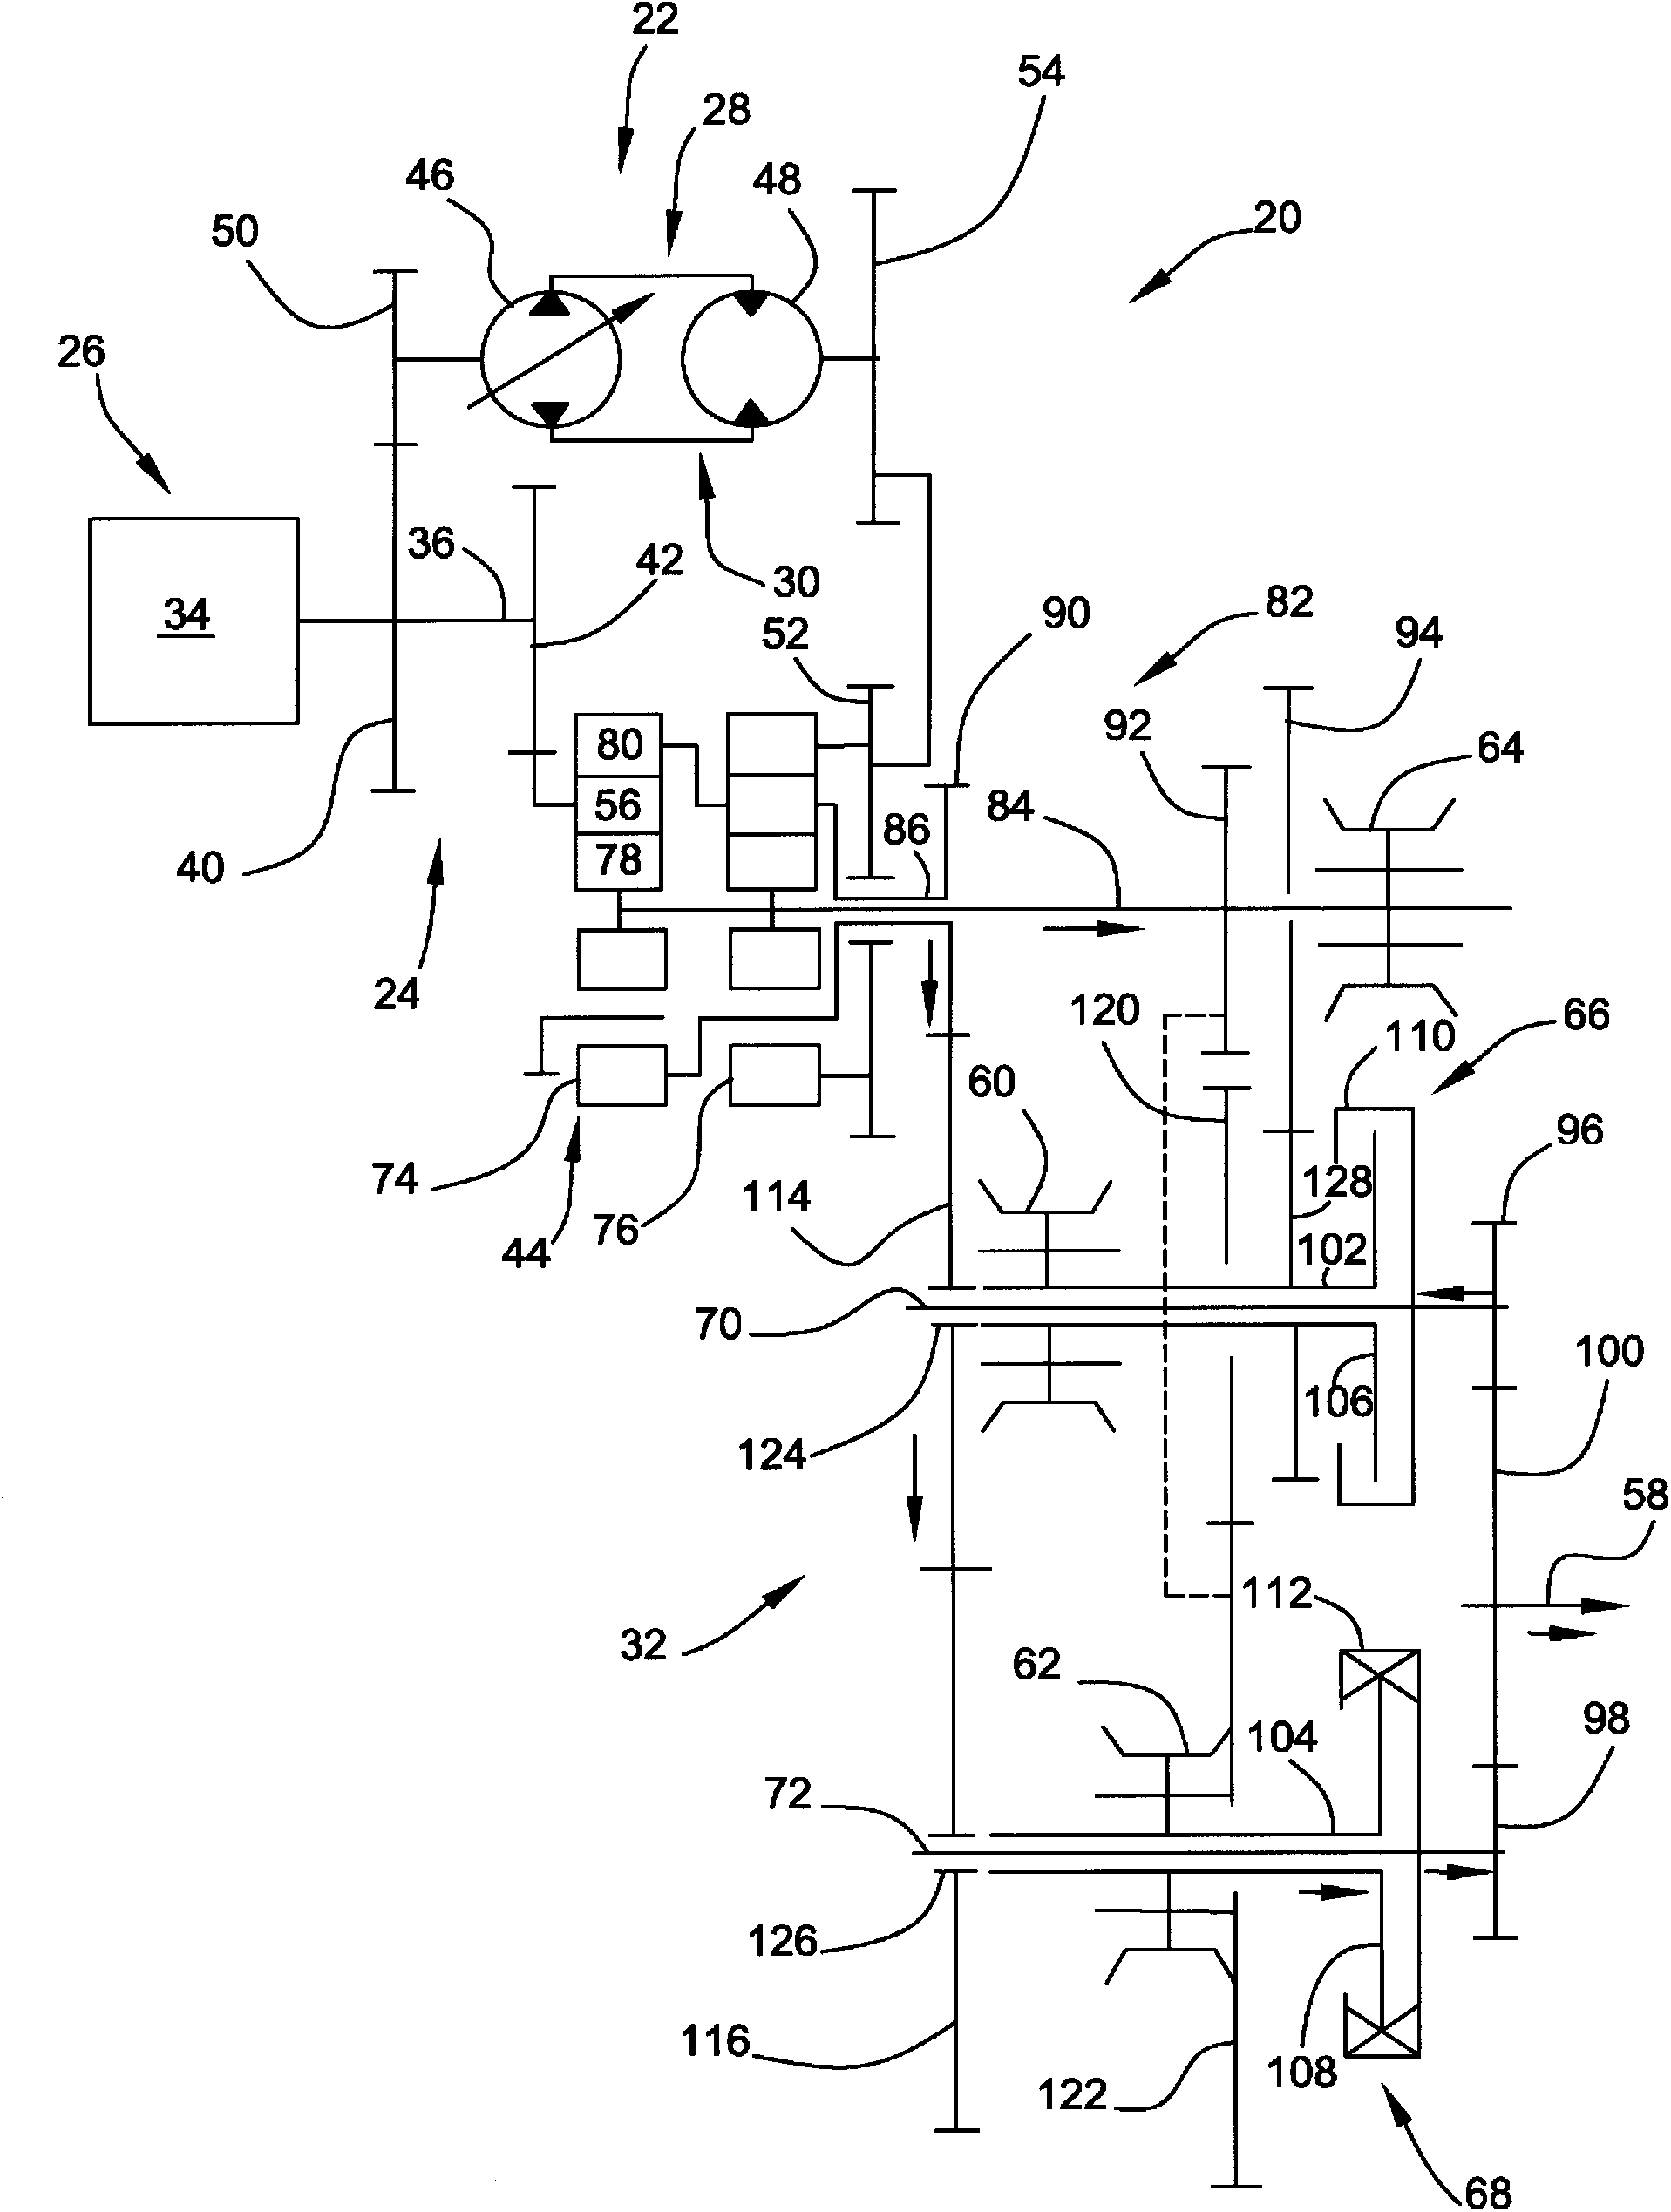 Method of synchronizing in split torque continuously variable dual clutch transmission